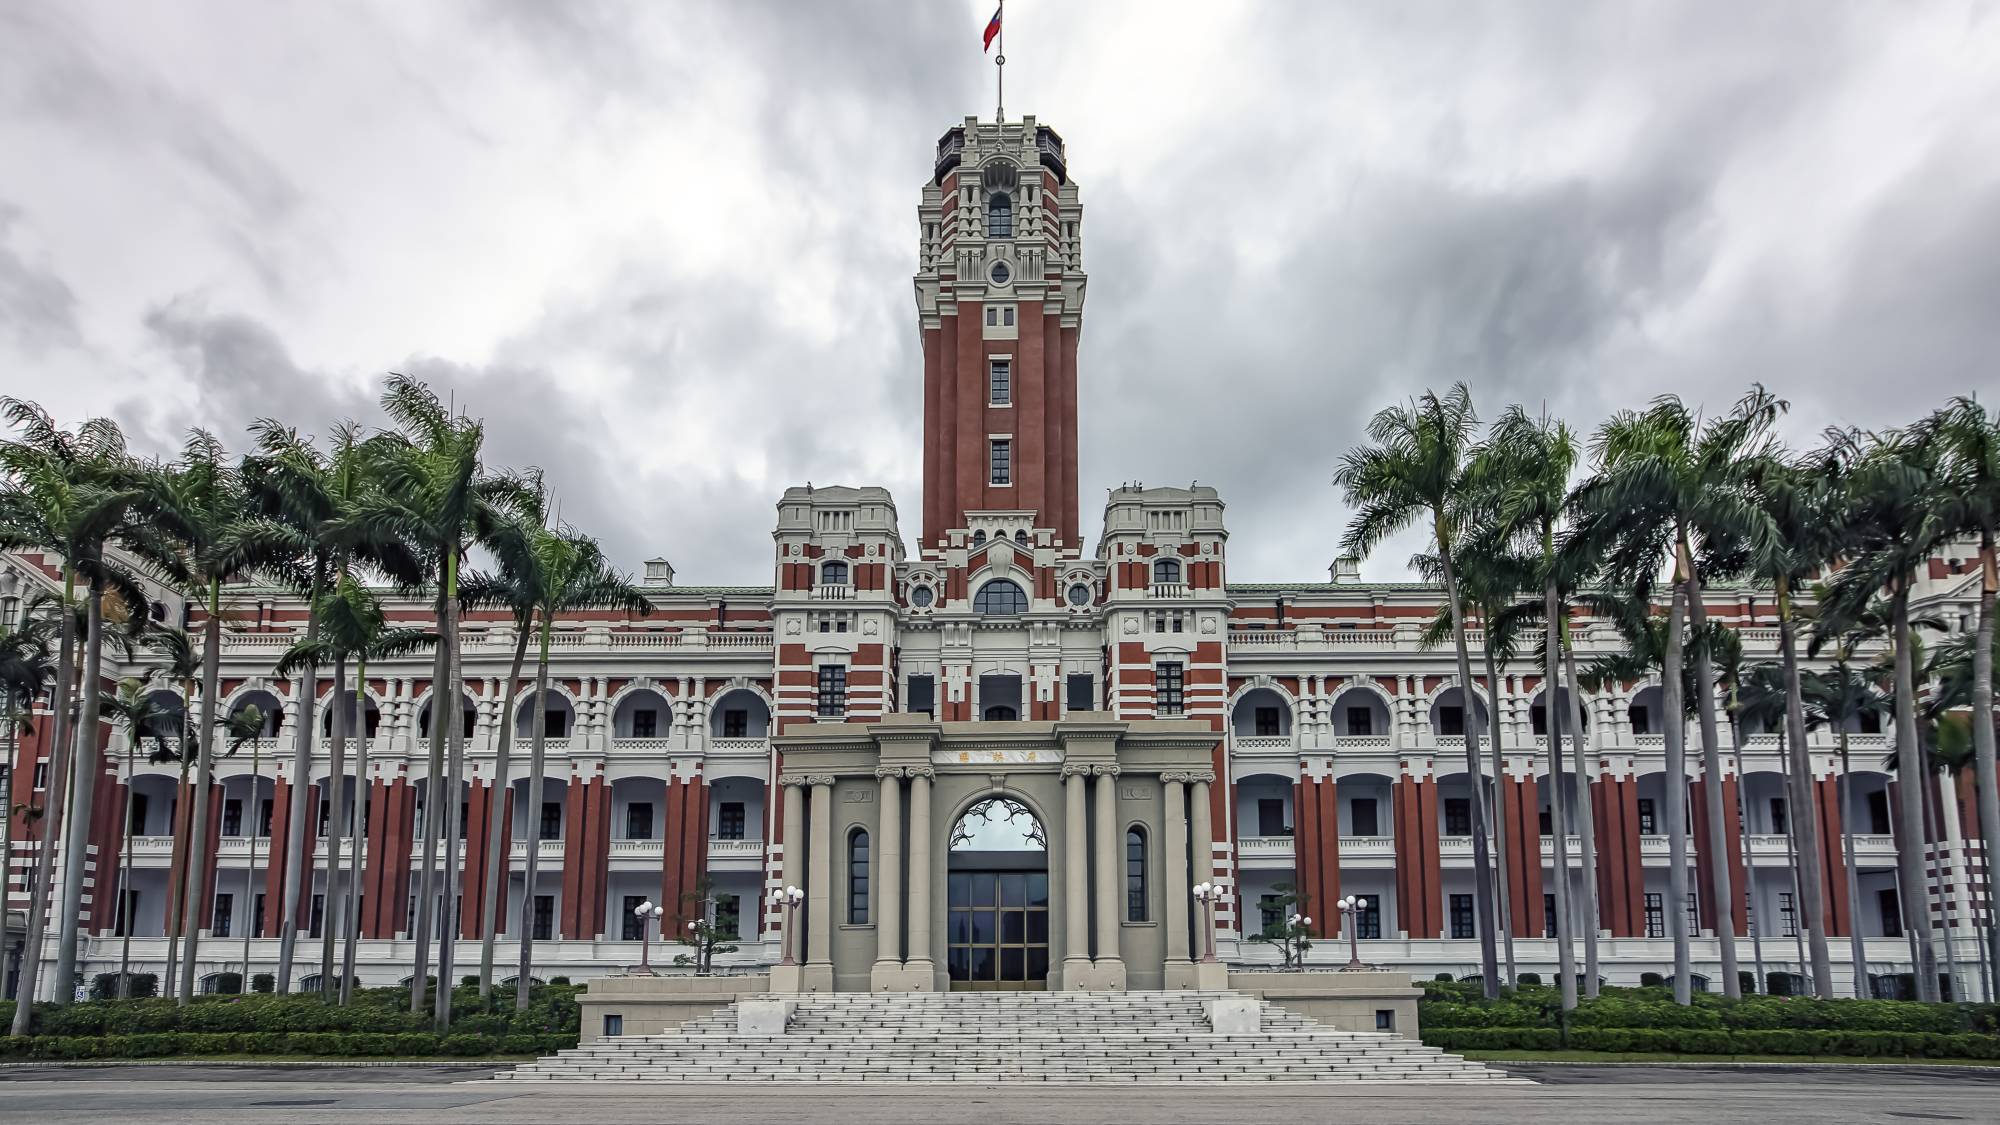 Taiwan’s presidential office building in Taipei was previously the office of the governor-general of Taiwan during Japanese colonial rule. | GETTY IMAGES